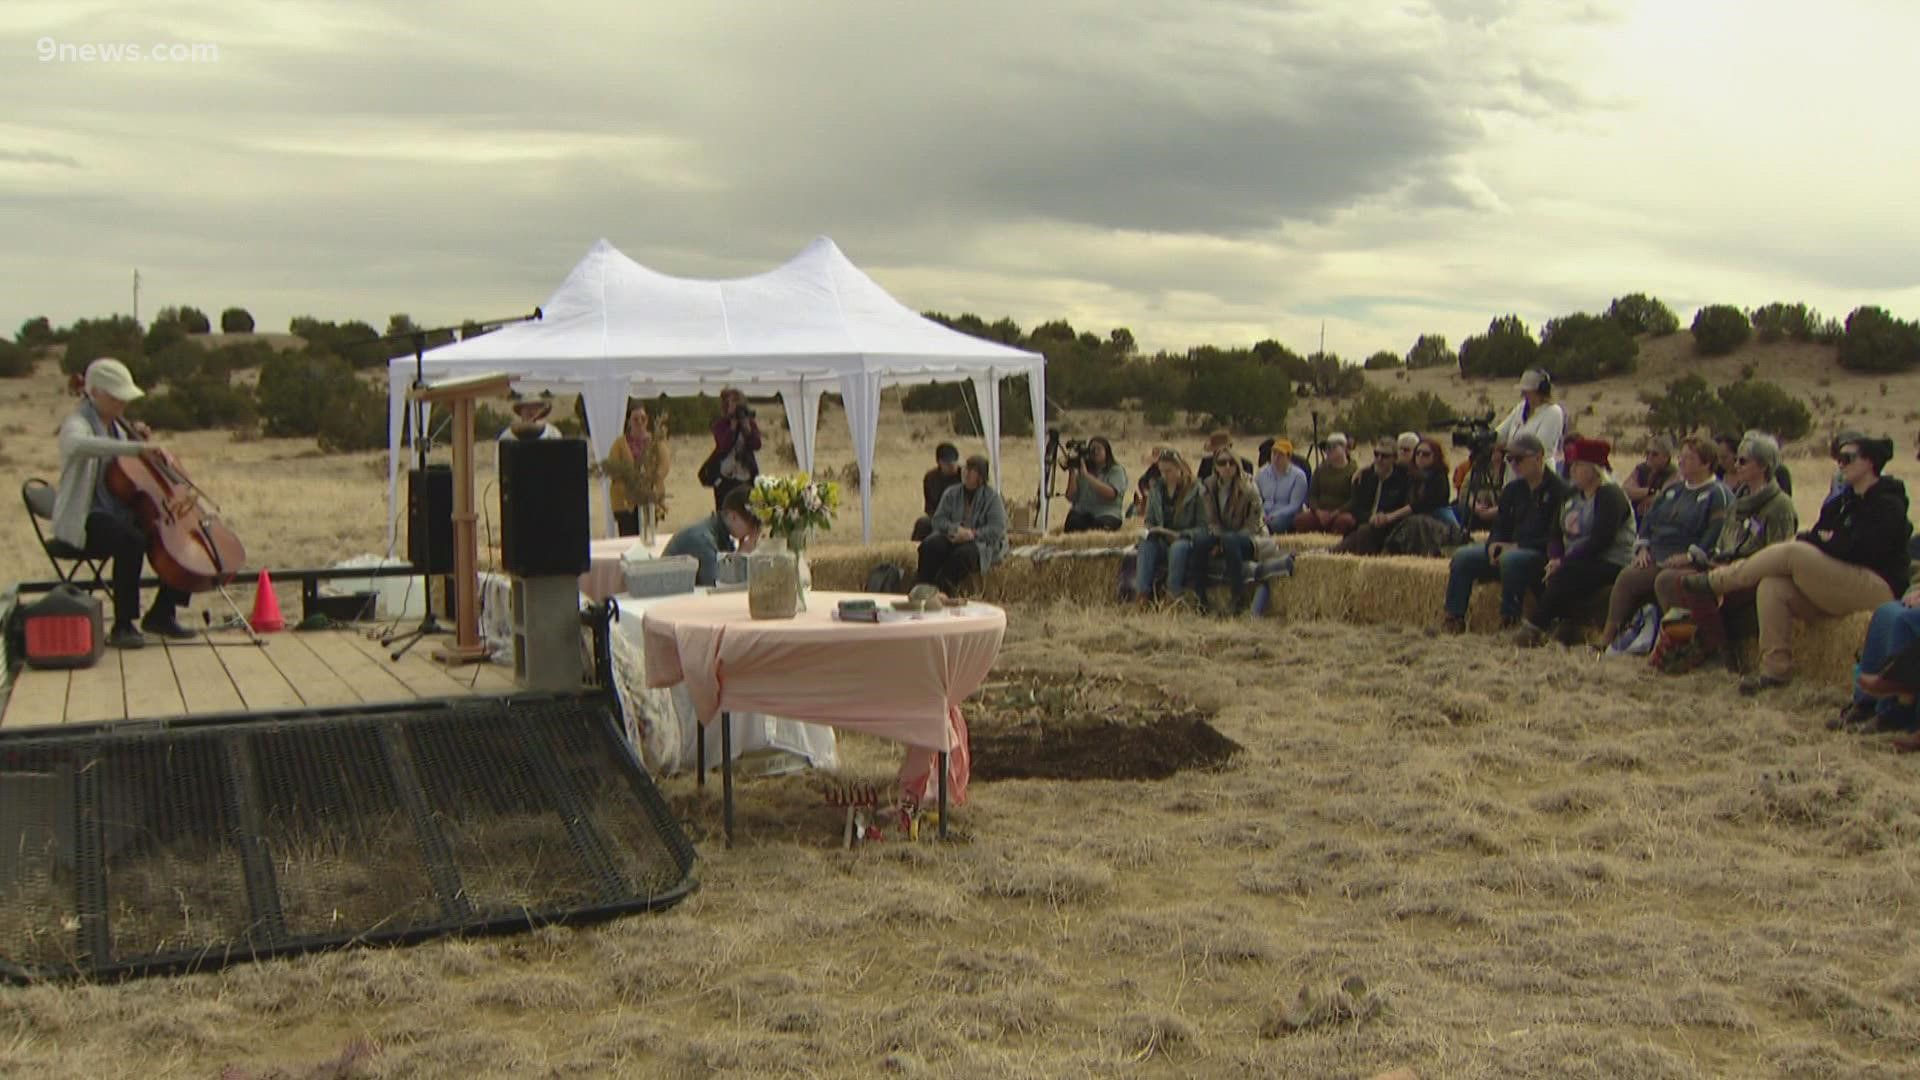 Human composting became legal in Colorado last year as a green alternative to burial or cremation.